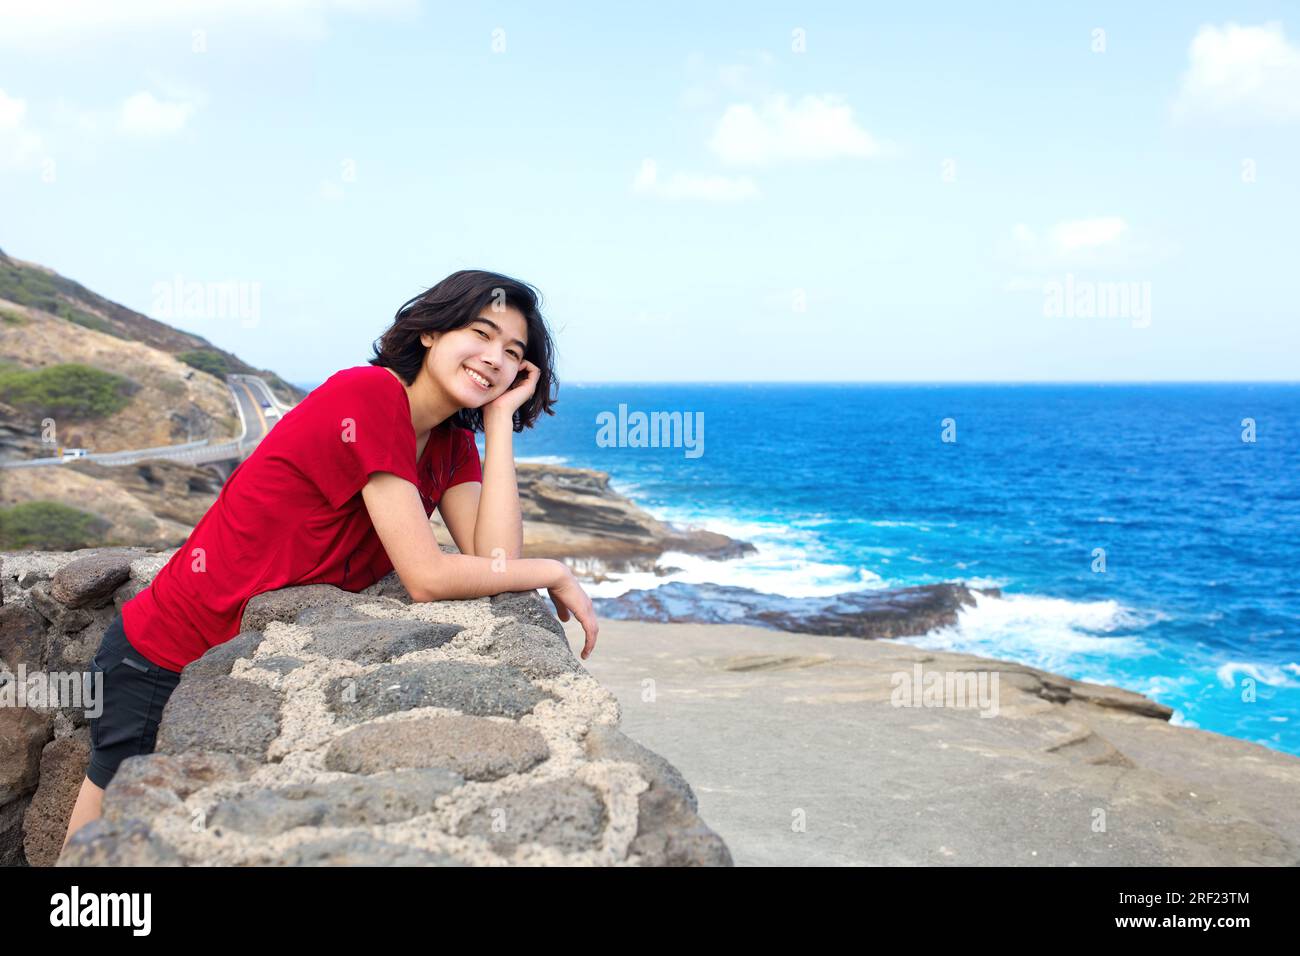 Young woman leaning against stone wall overlooking Hawaiian ocean from a high scenic viewpoint Stock Photo